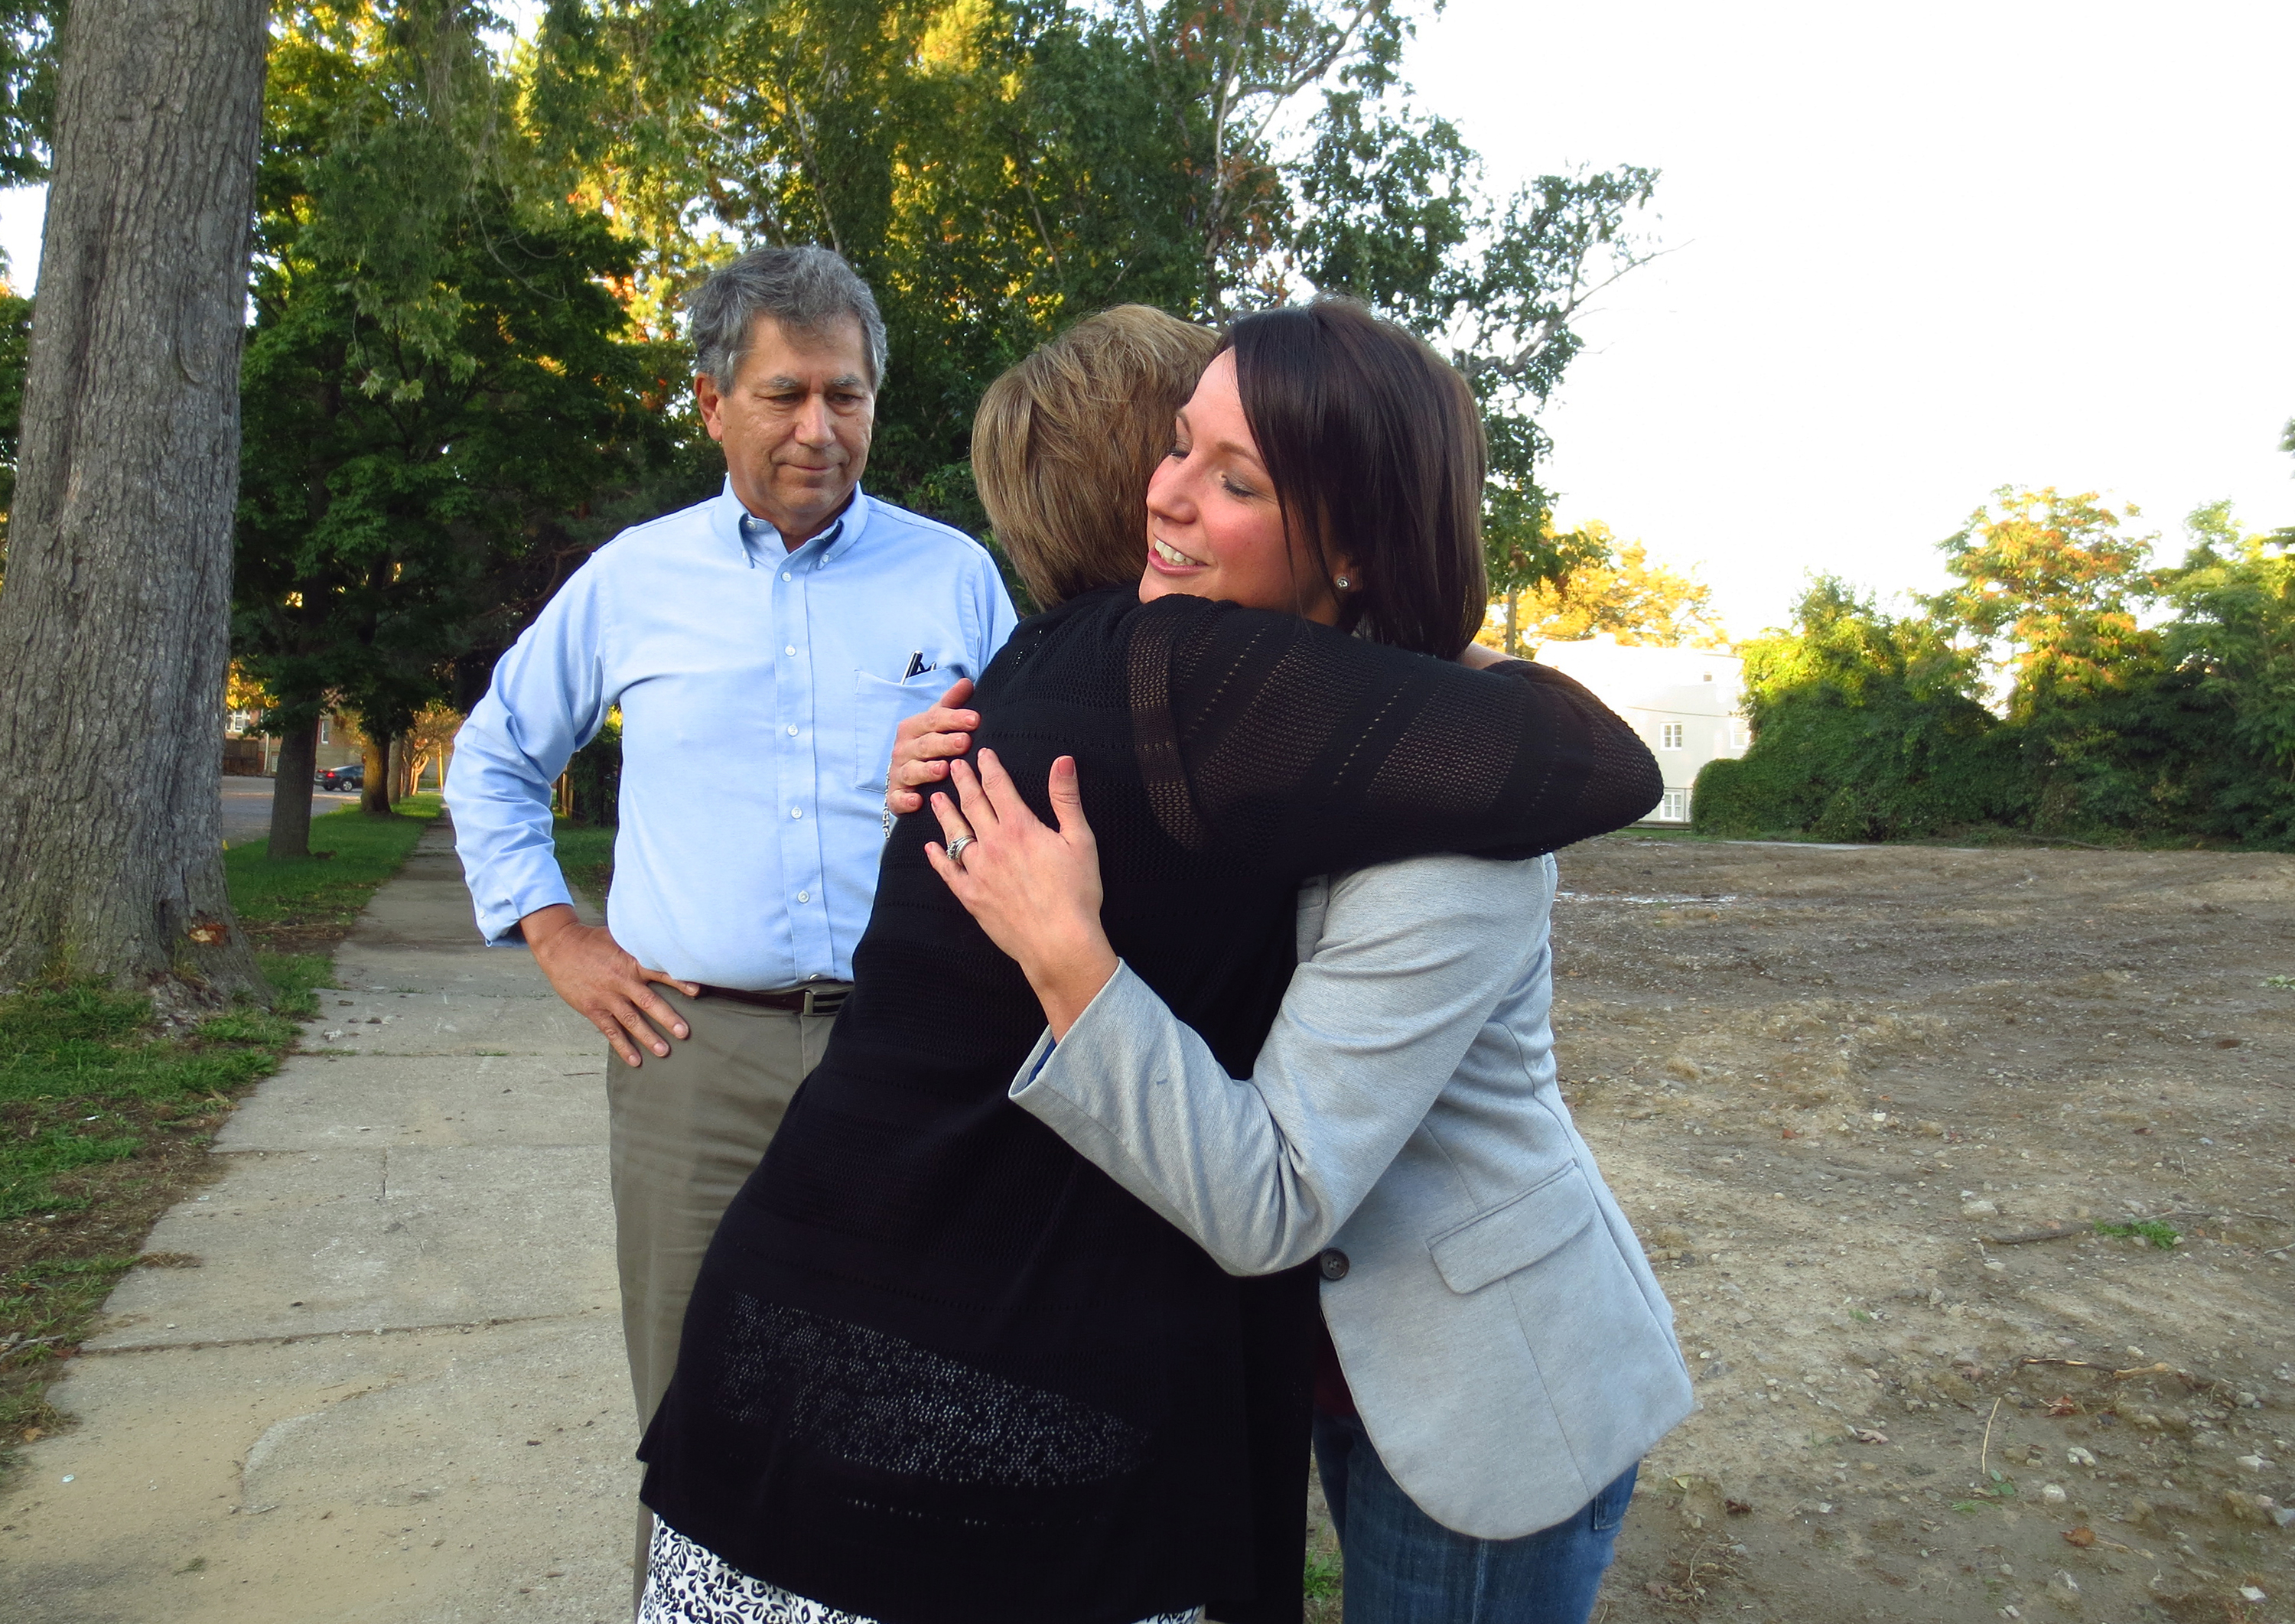 Mandy Sattler, right, gets a hug from pro-life activist Ann Barrick Sept. 26 at the site of the now-demolished Center for Choice abortion clinic in Toledo, Ohio. Looking on is Ed Sitter, executive director of the Foundation for Life. Barrick prayed outside the abortion clinic for nine years and Sattler had an abortion there 10 years ago. (CNS photo/Katie Breidenbach) 